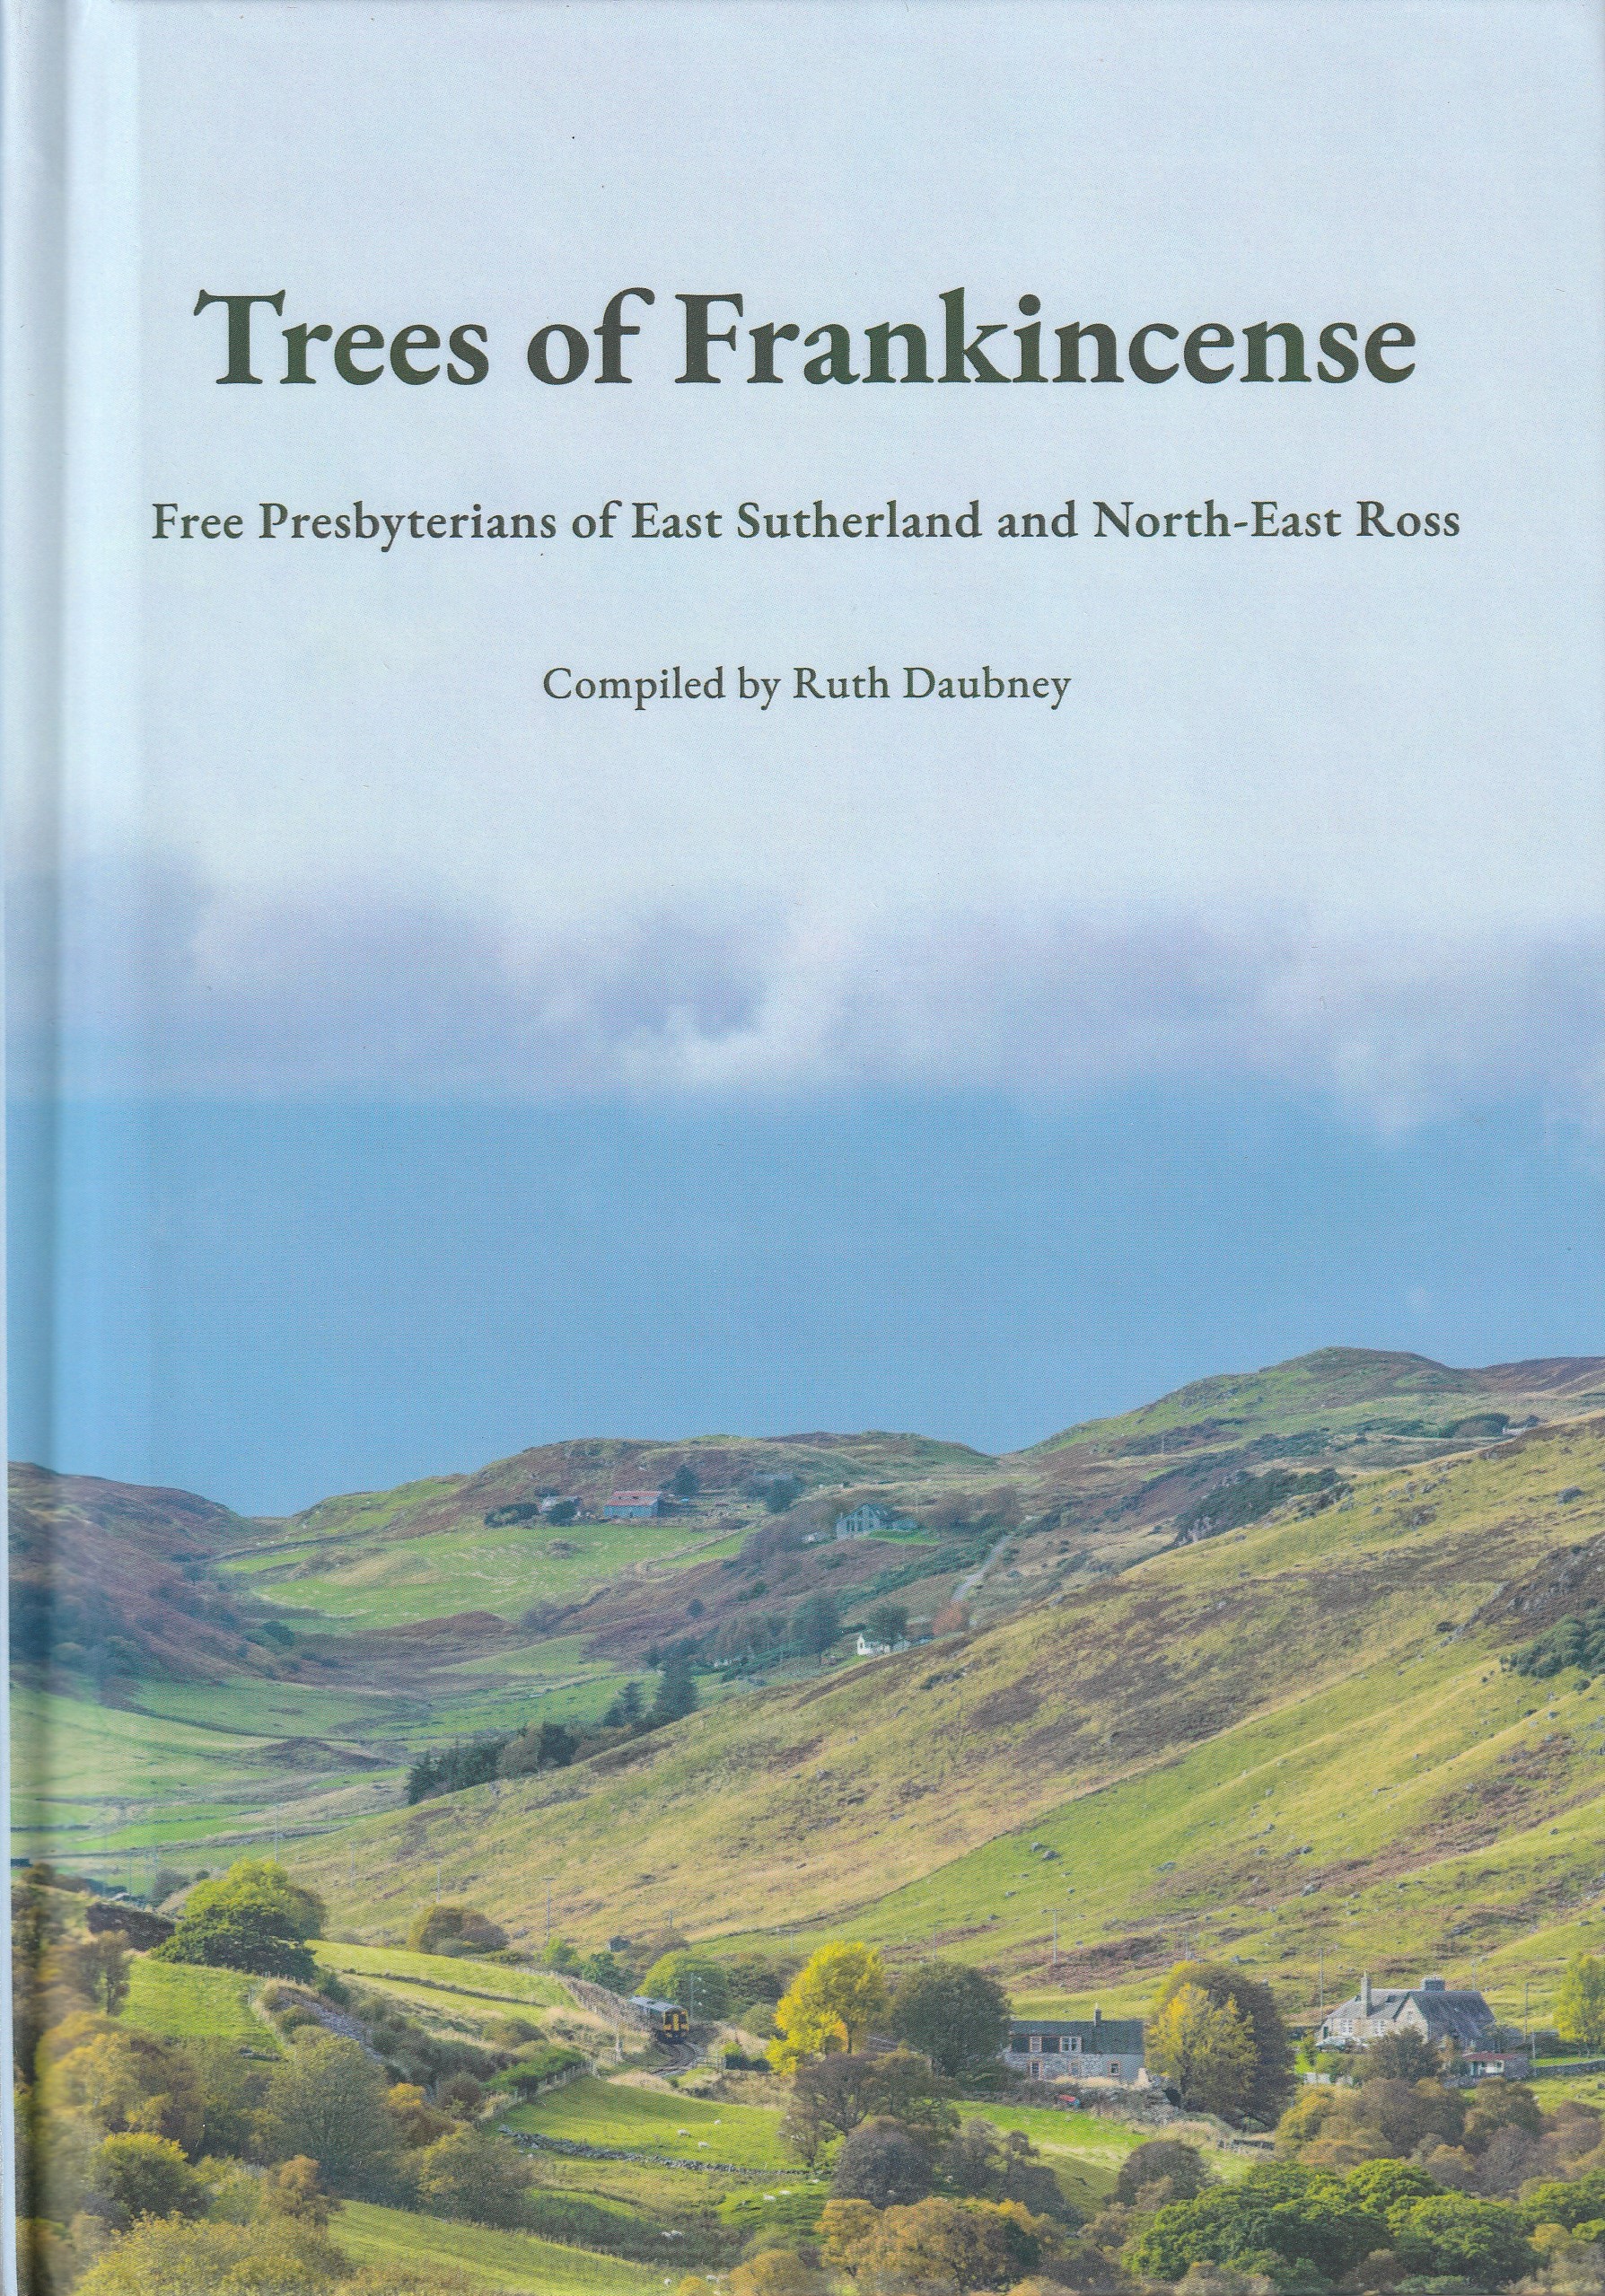 Trees of Frankincense: Free Presbyterians of East Sutherland and North-East Ross (hardback)